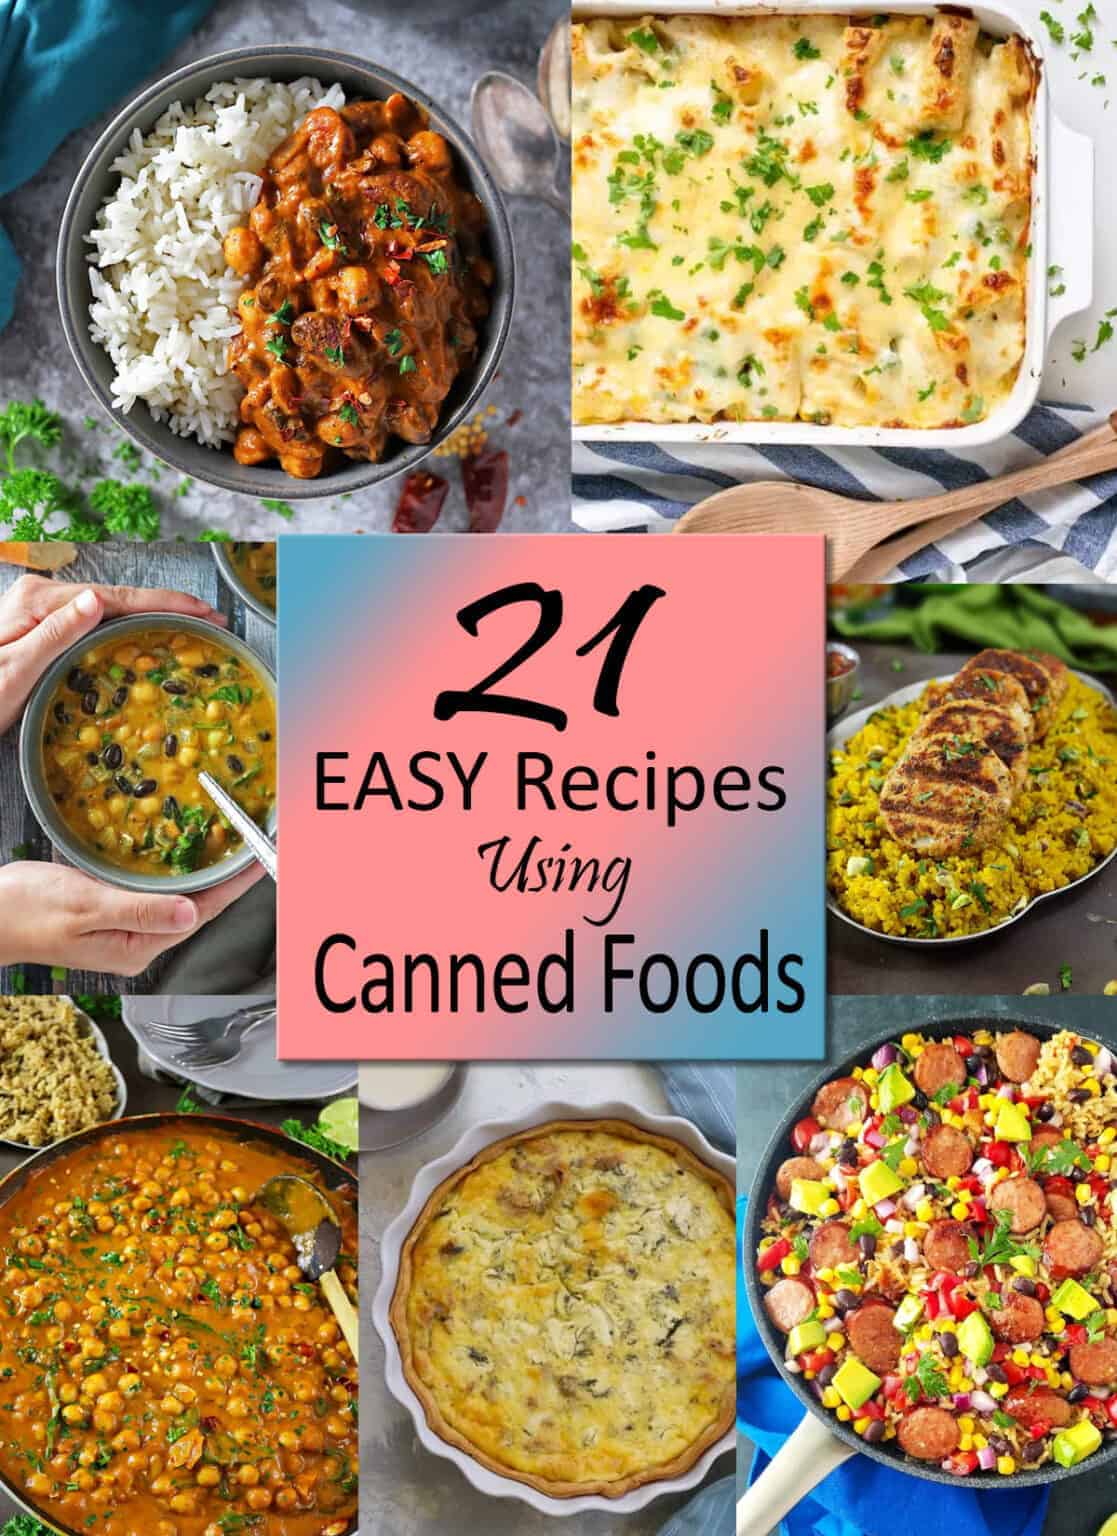 21 Easy Recipes Using Canned Foods - Savory Spin